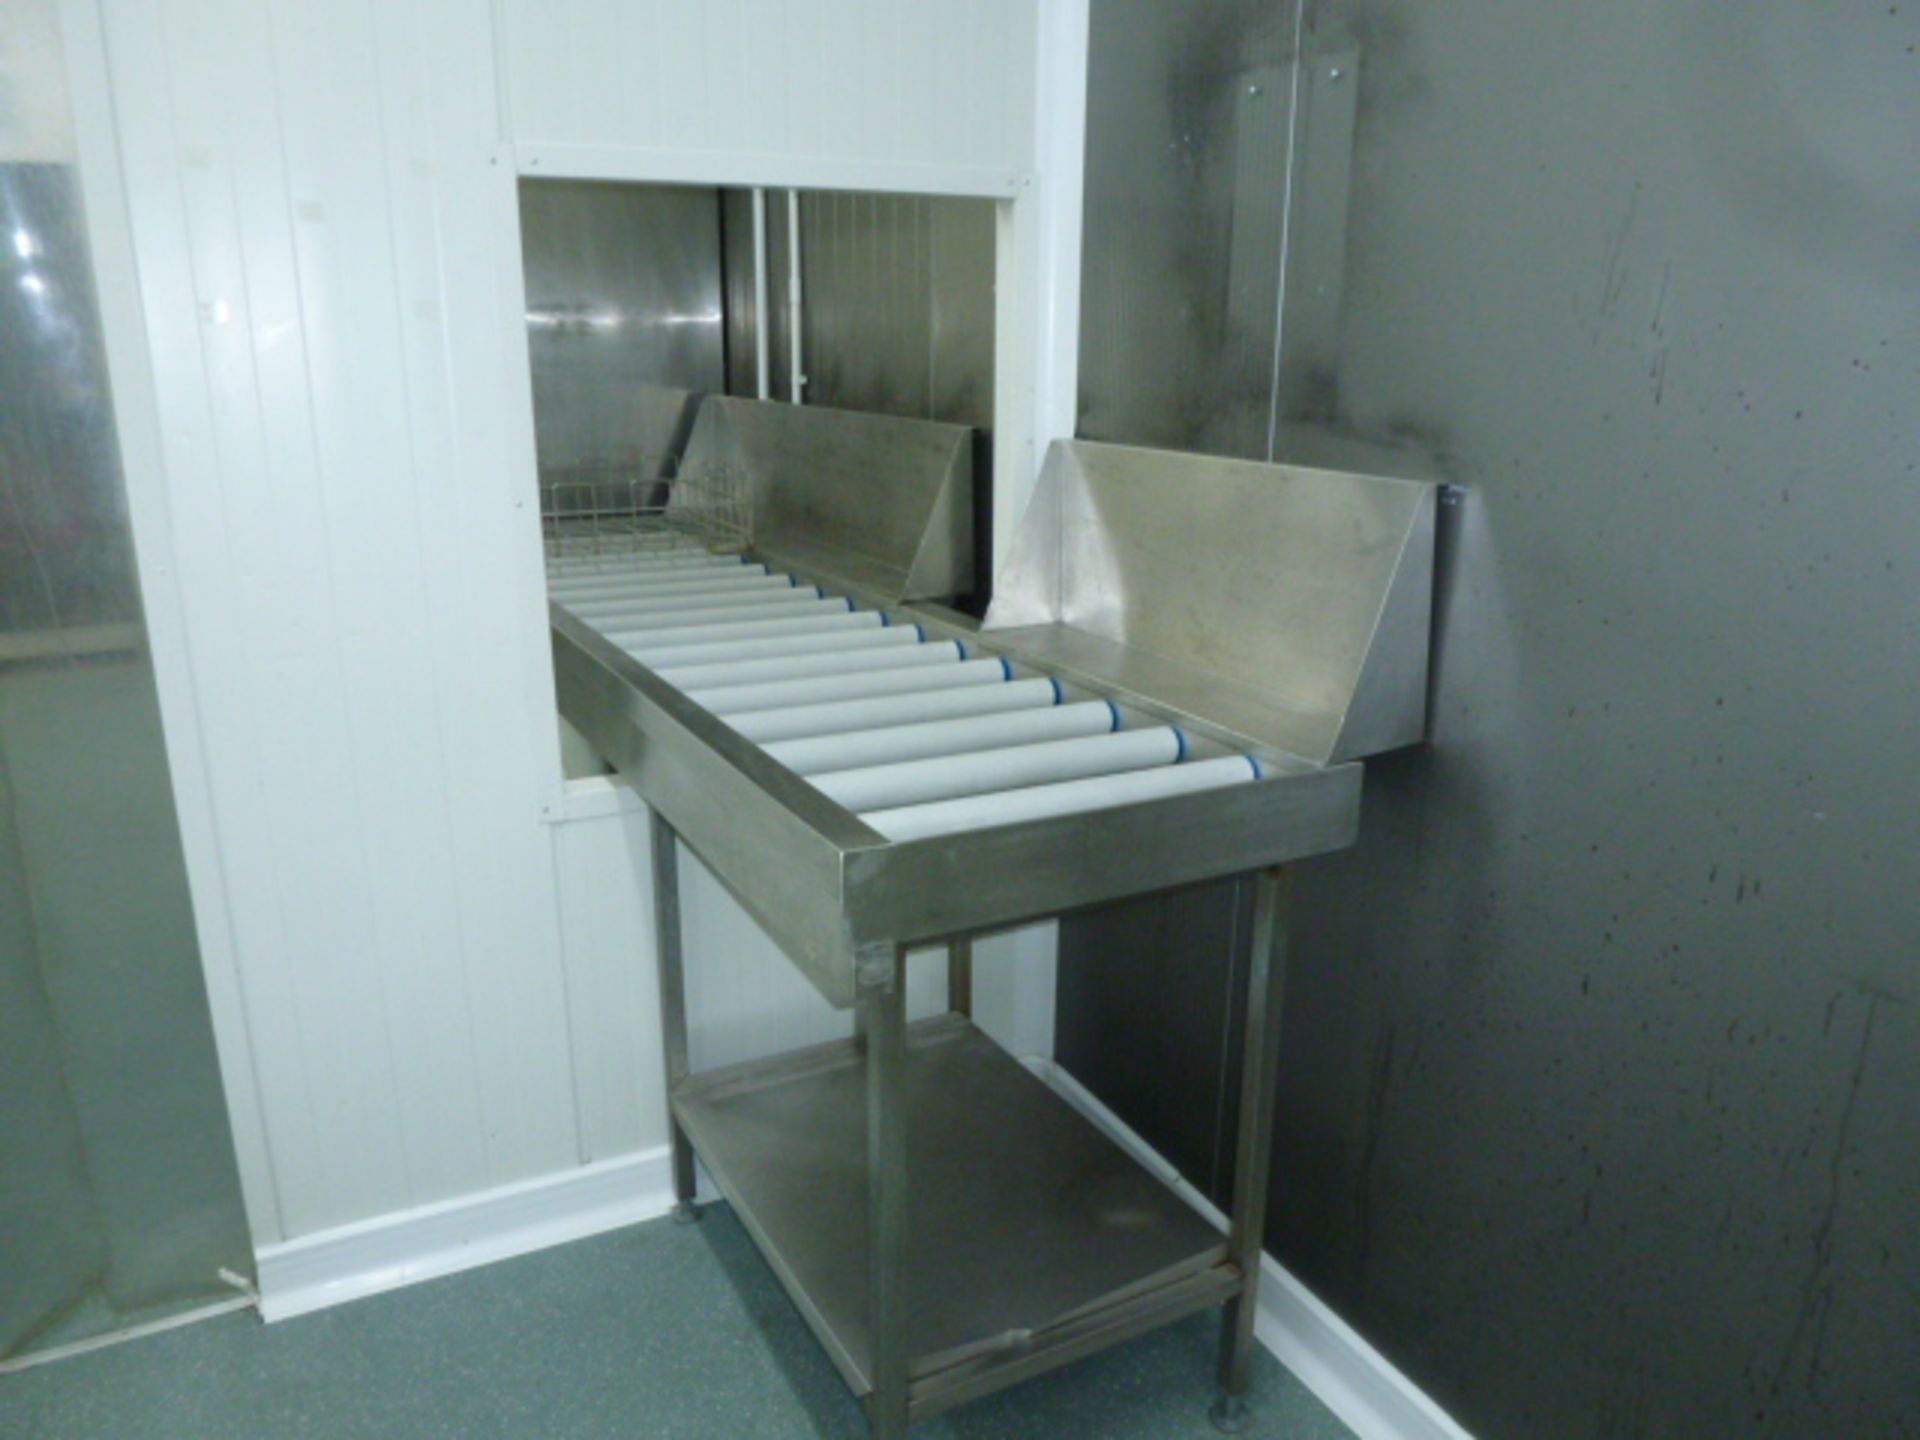 Stainless Steel Dishwasher Outlet Table with Guide Runners & Drain. Size (L) 250cm - Image 5 of 5